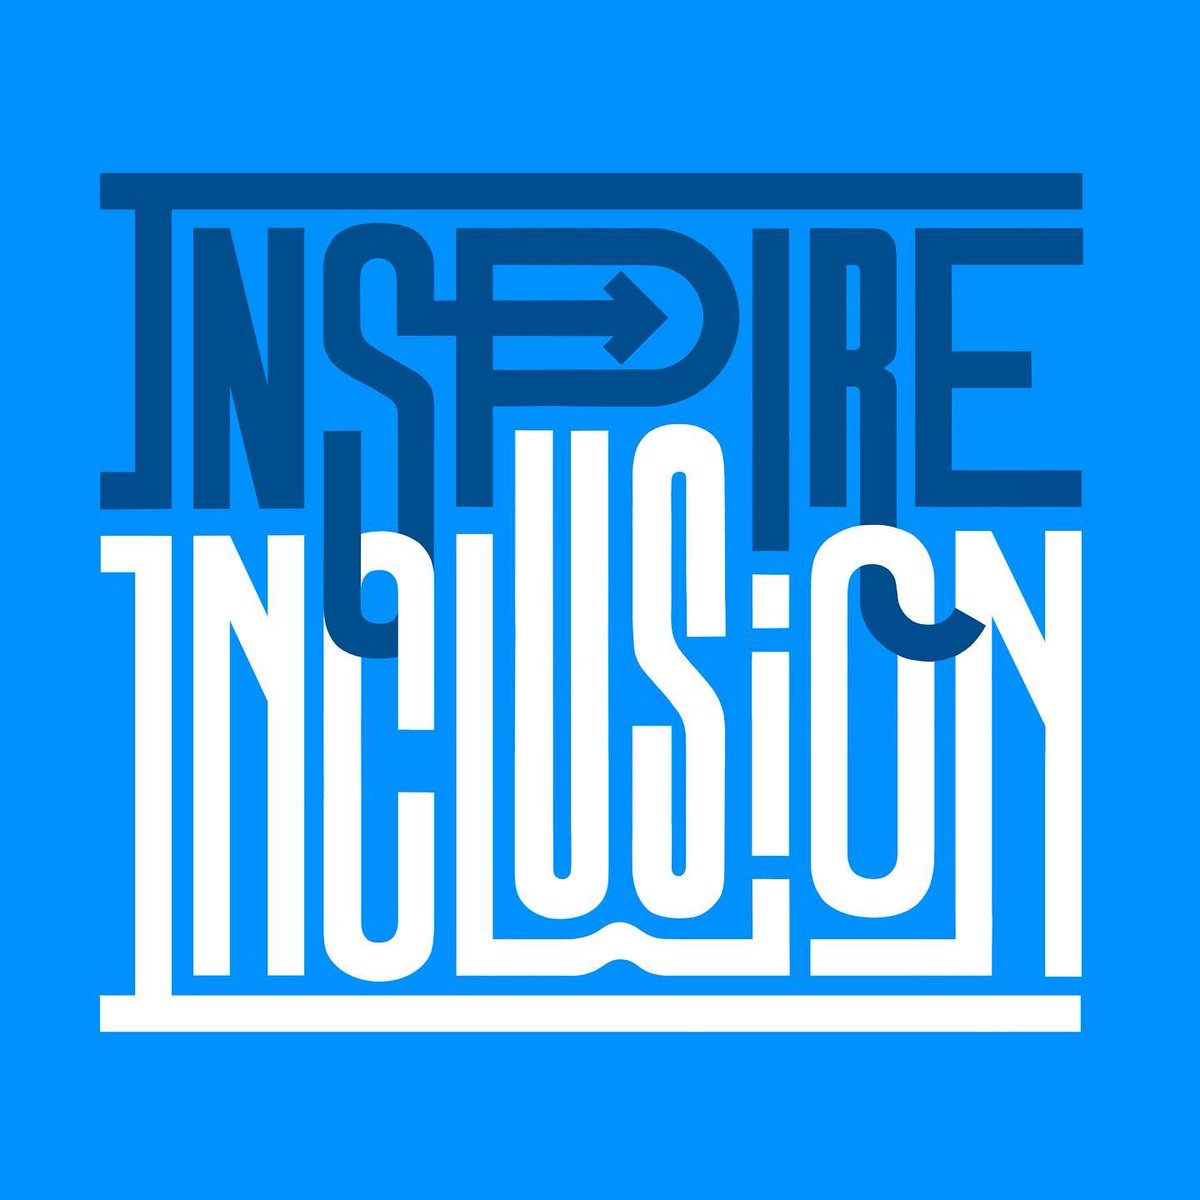 Thank you Ollie Cooper for sharing this bold and playful #design promoting the #IWD2024 #InspireInclusion theme 🎨 #London based 🇬🇧 #lettering #artist & #designer Ollie has an impressive branding background working for many high-profile clients. #IWD #InternationalWomensDay